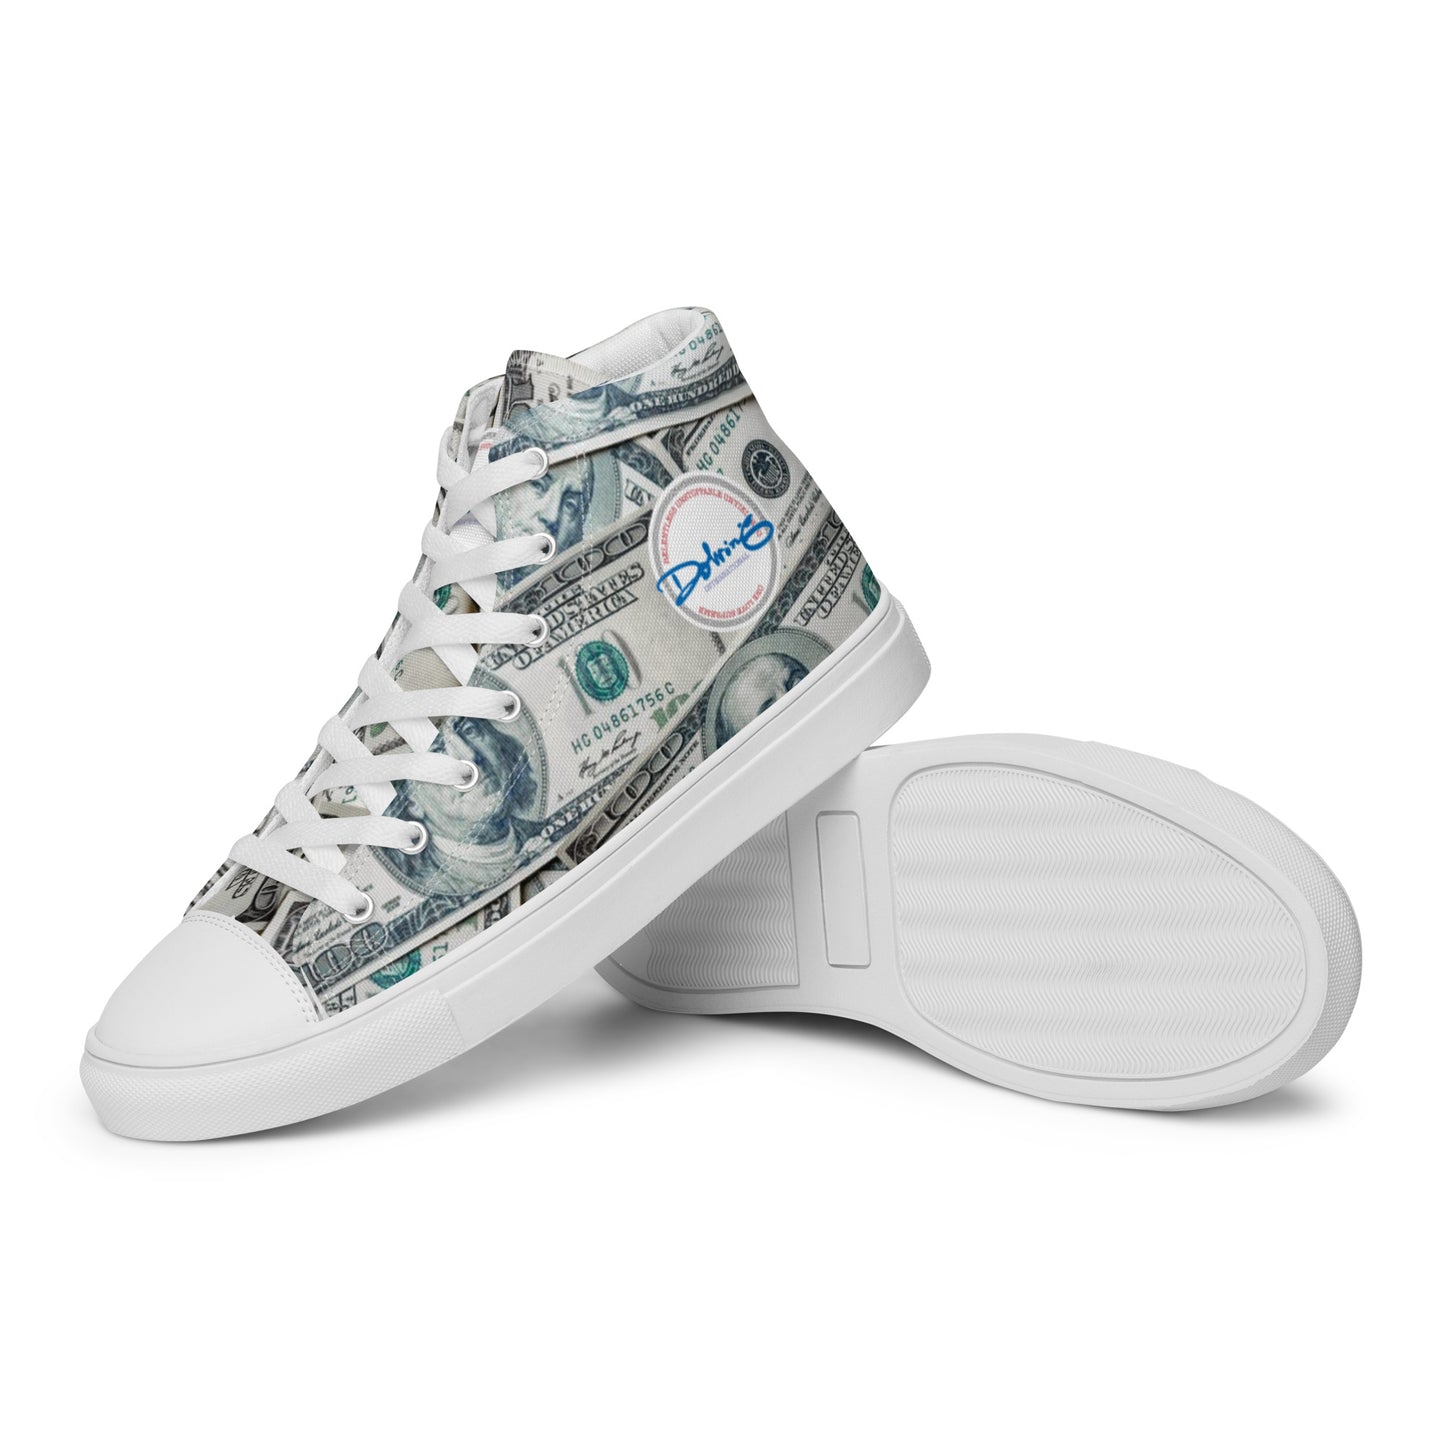 ™™™™THE CASHBAH by DOLVING - Men’s high top canvas shoes